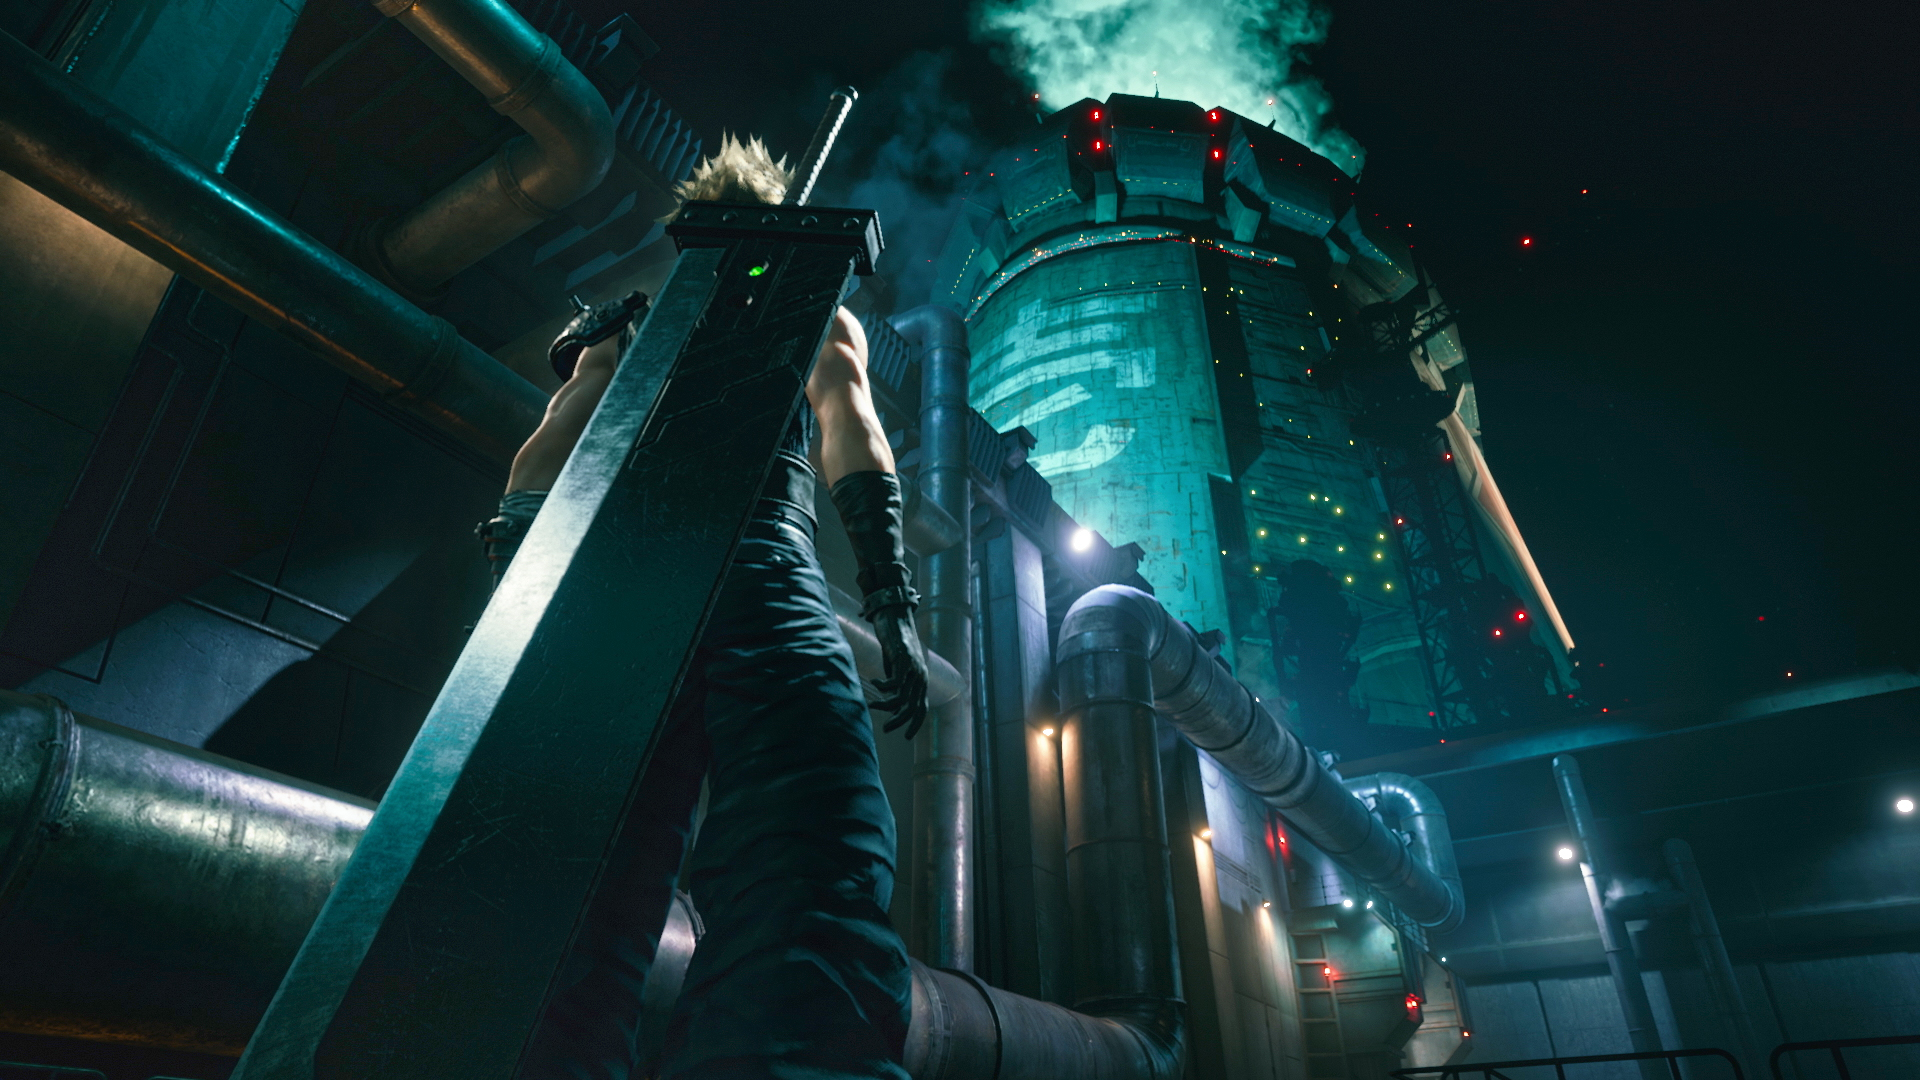 Free FINAL FANTASY VII REMAKE Zoom background available to download. Square Enix Blog